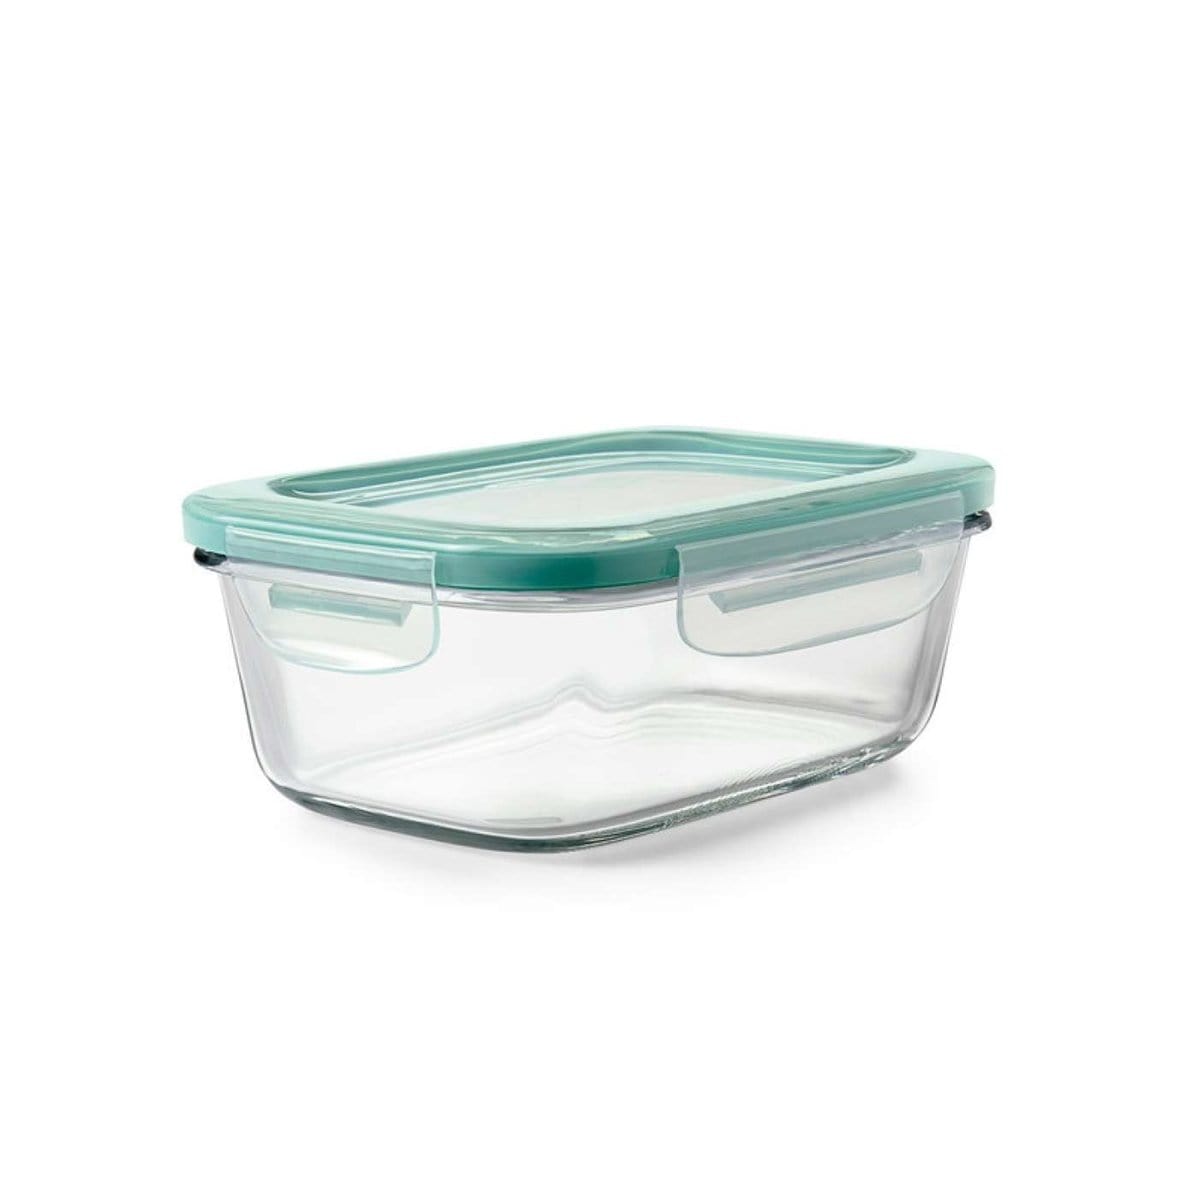 https://cdn.shopify.com/s/files/1/0474/2338/9856/products/oxo-oxo-good-grips-snap-glass-rectangle-container-3-5-cup-29354-20088375443616_1600x.jpg?v=1628218061